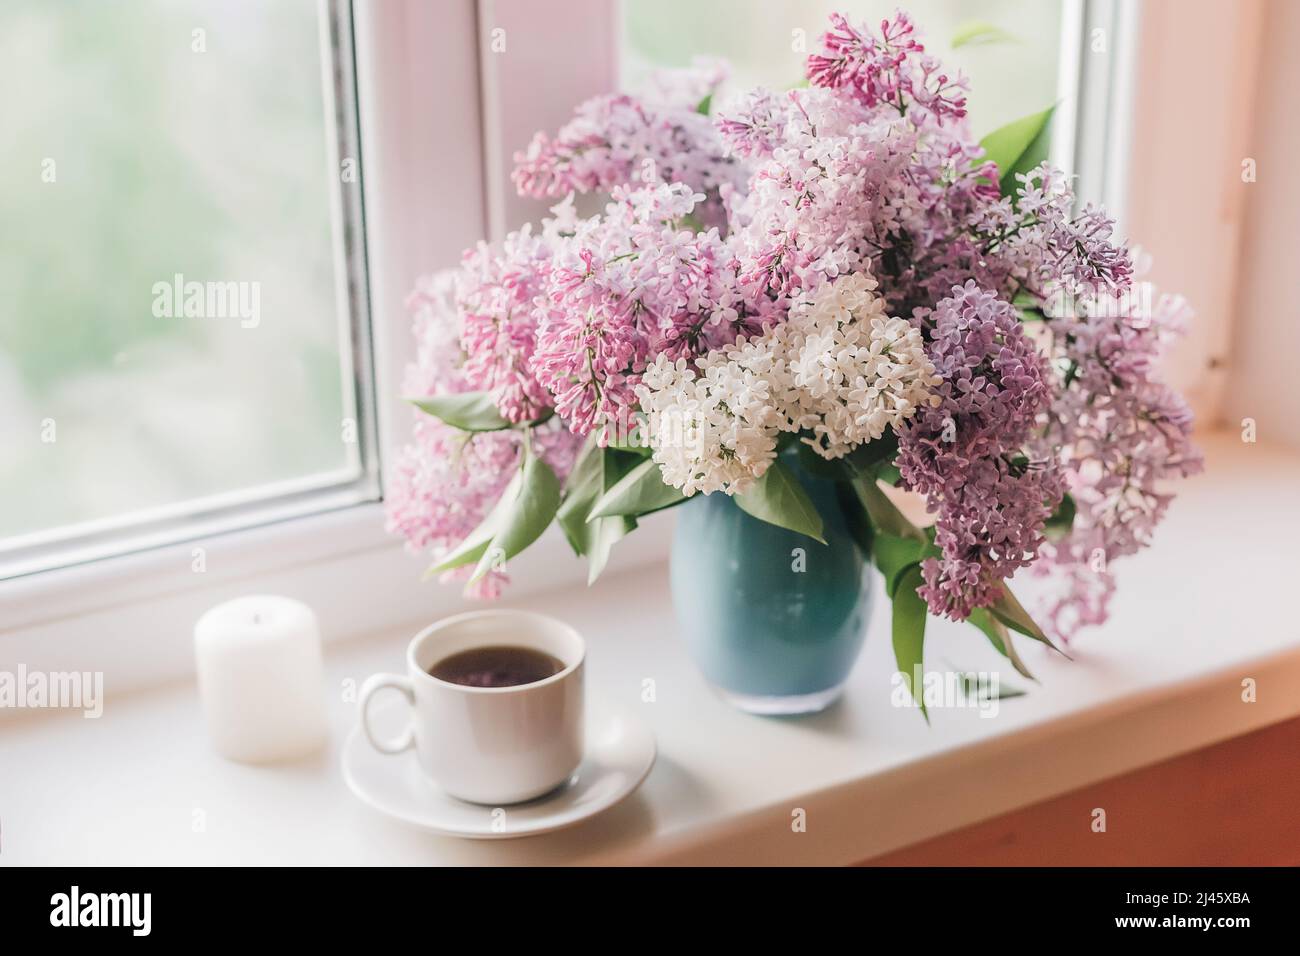 Bouquet of lilacs in a vase,cup of coffee and books on the windowsill. Stock Photo